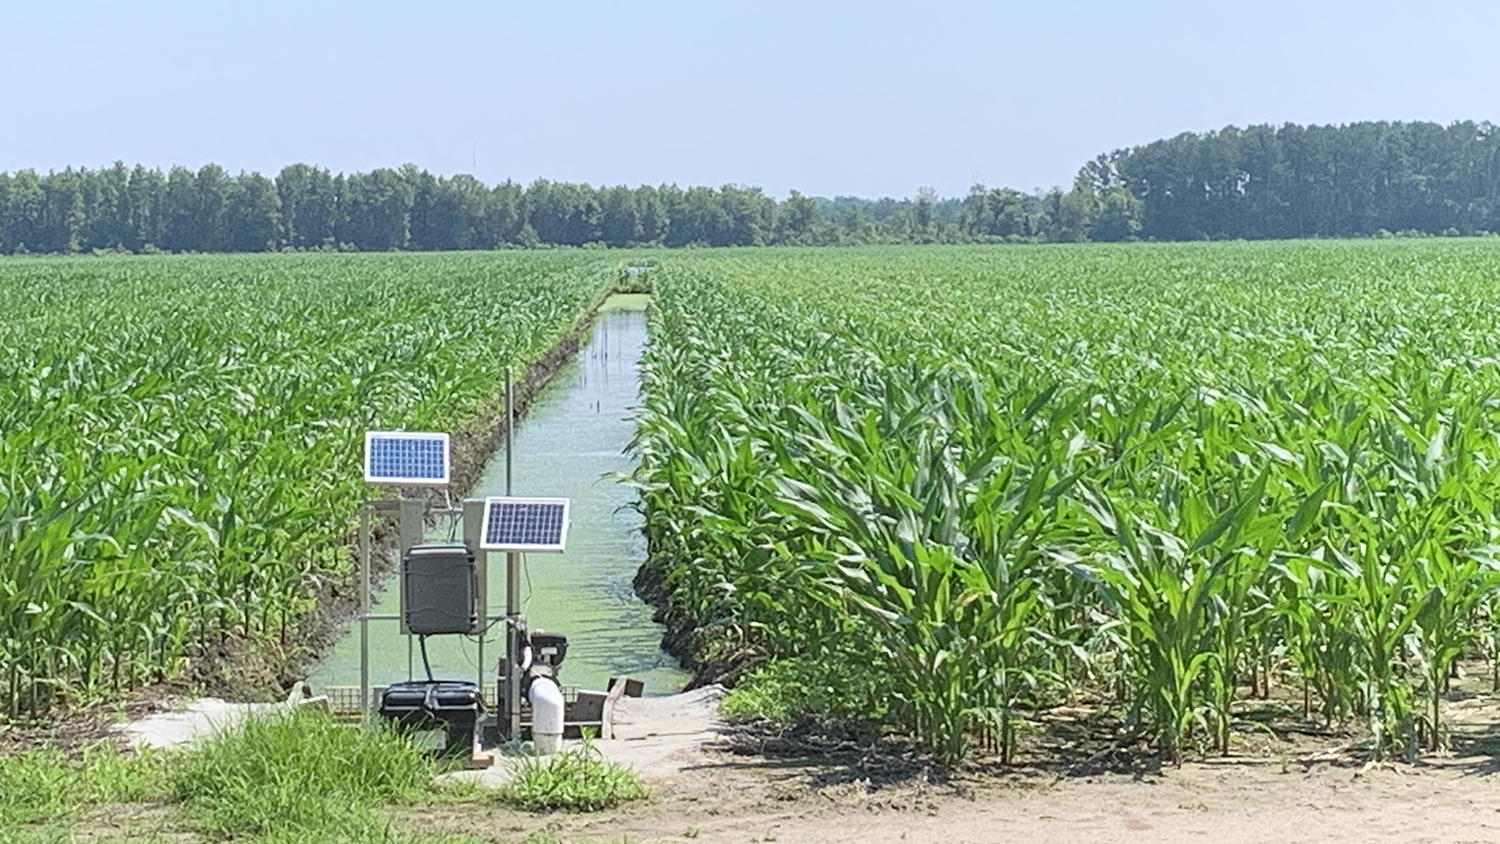 A solar panel and other equipment at the edge of a canal in a corn field